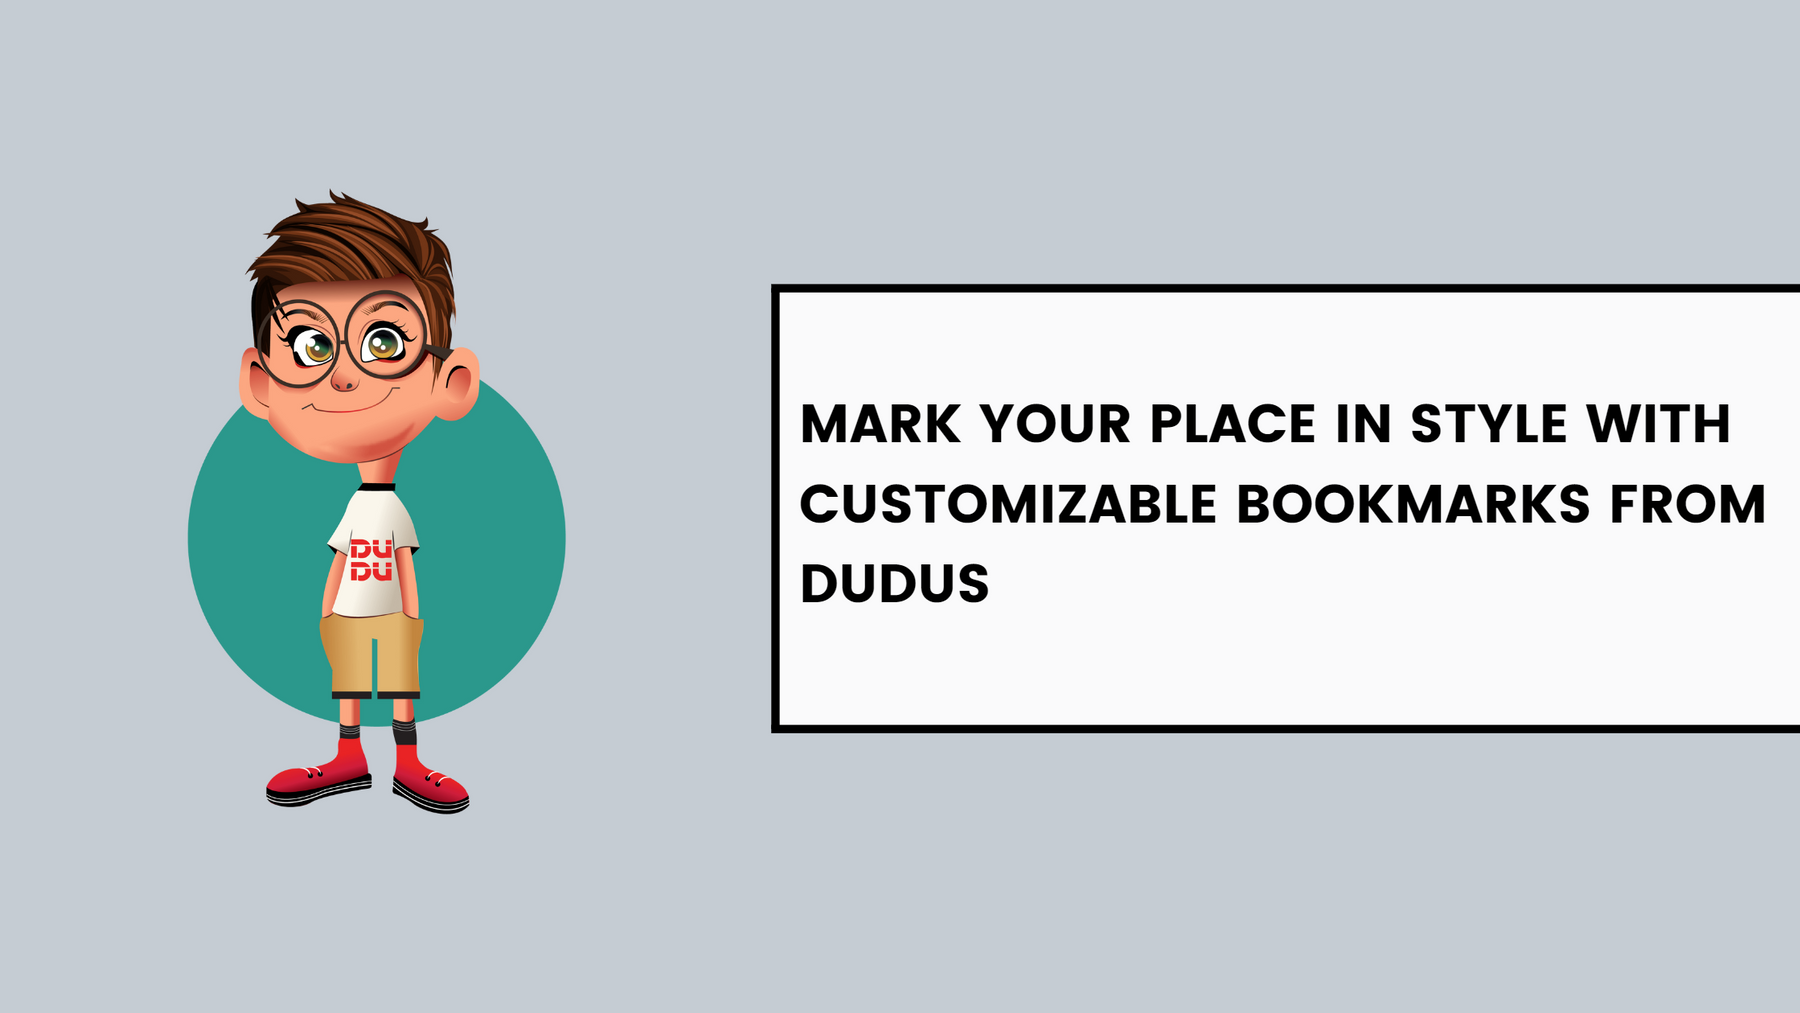 Mark Your Place in Style with Customizable Bookmarks from Dudus